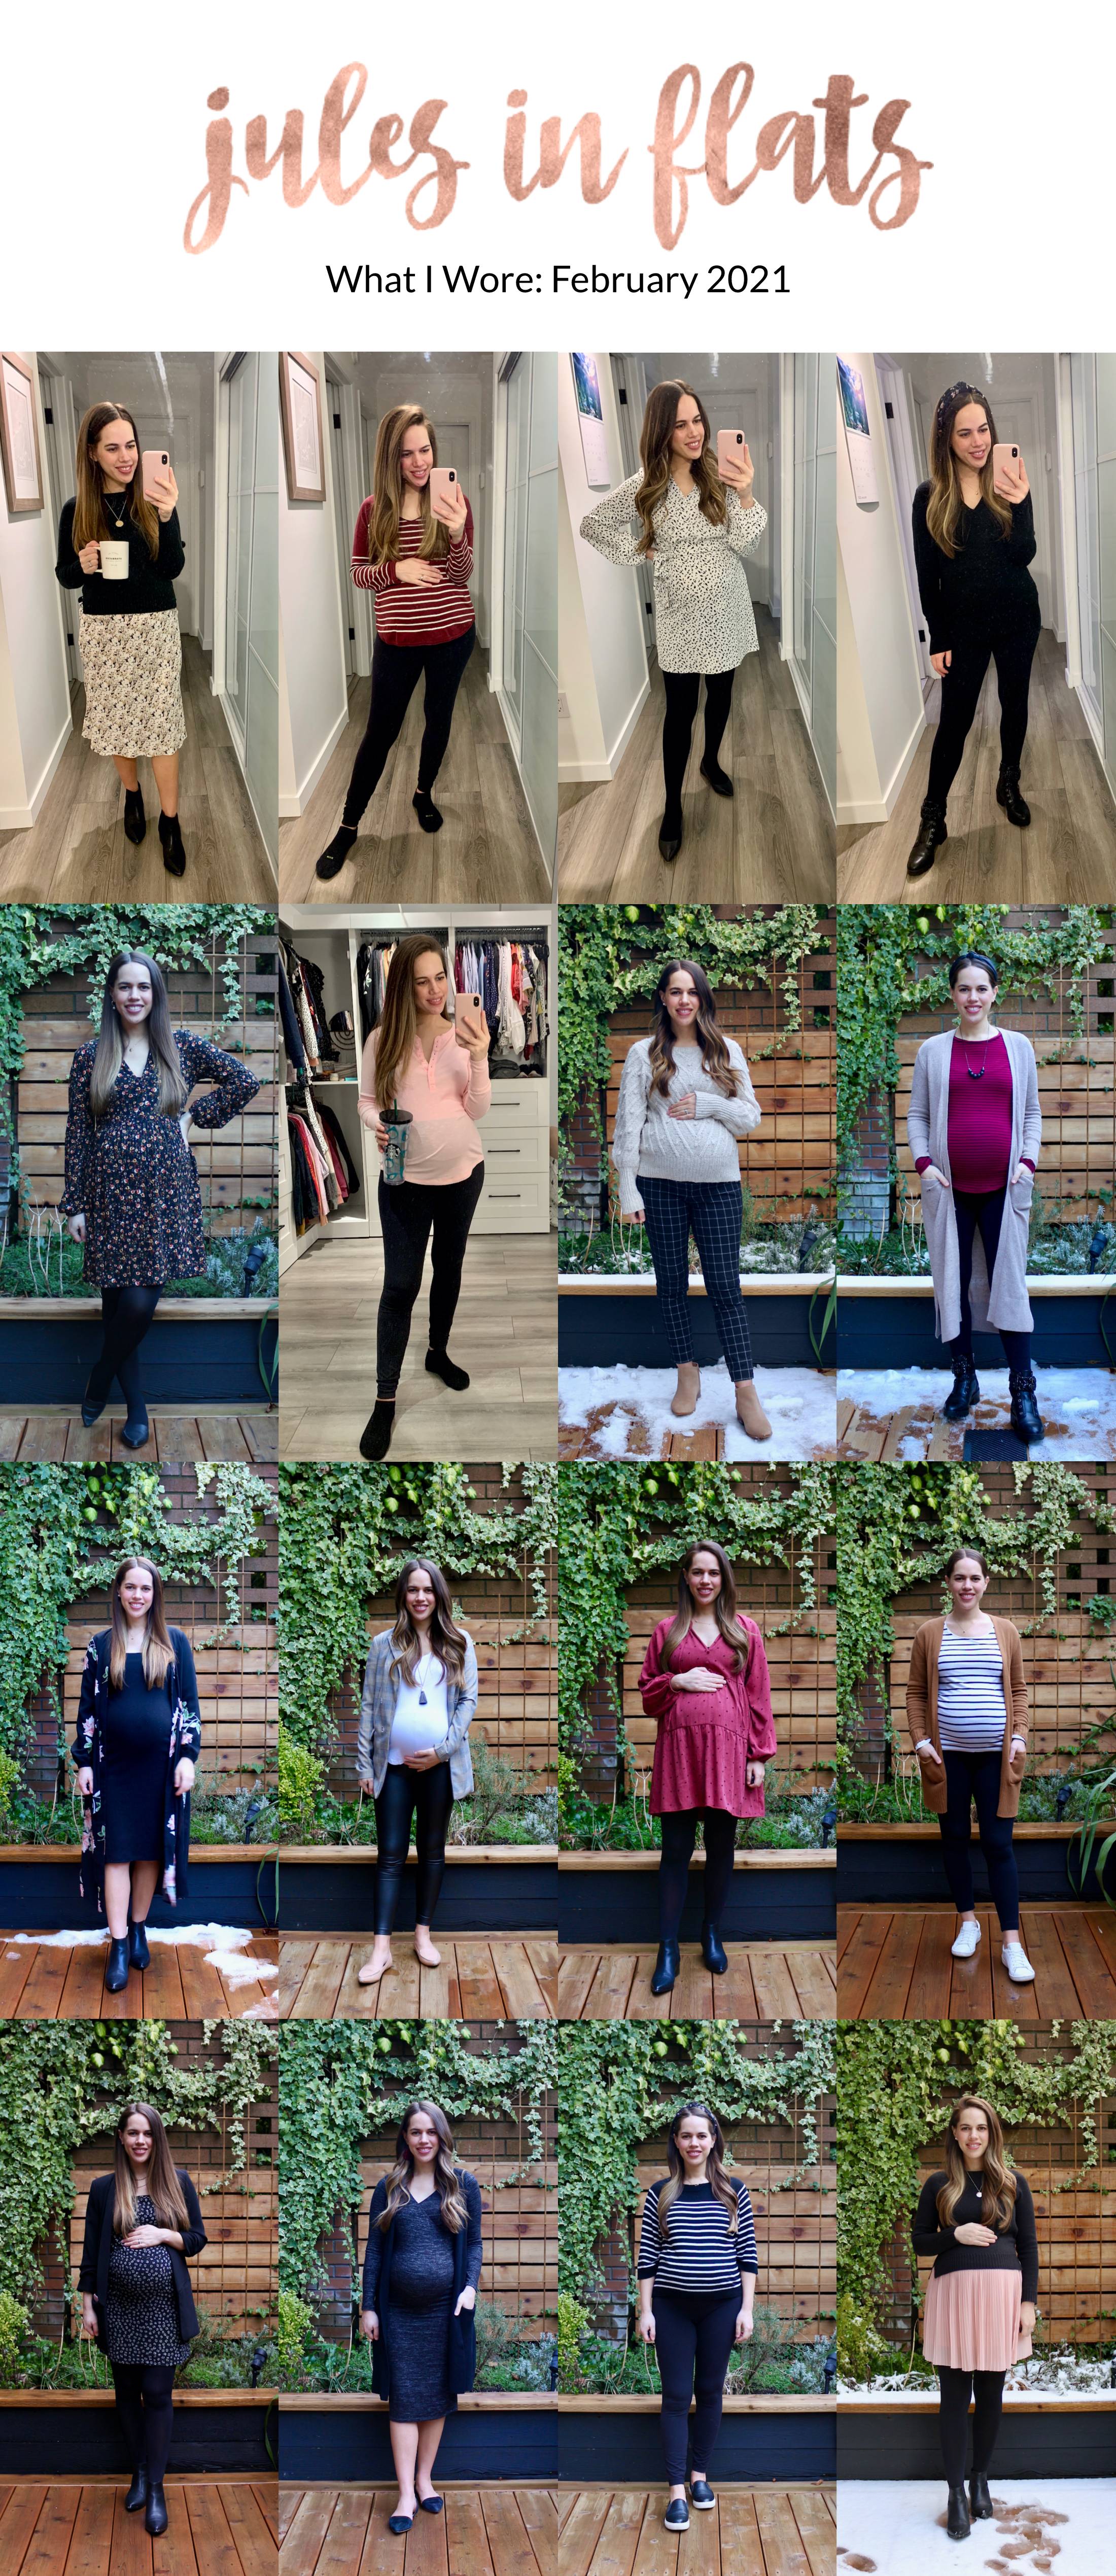 Jules in Flats - Monthly Outfit Roundup February 2021